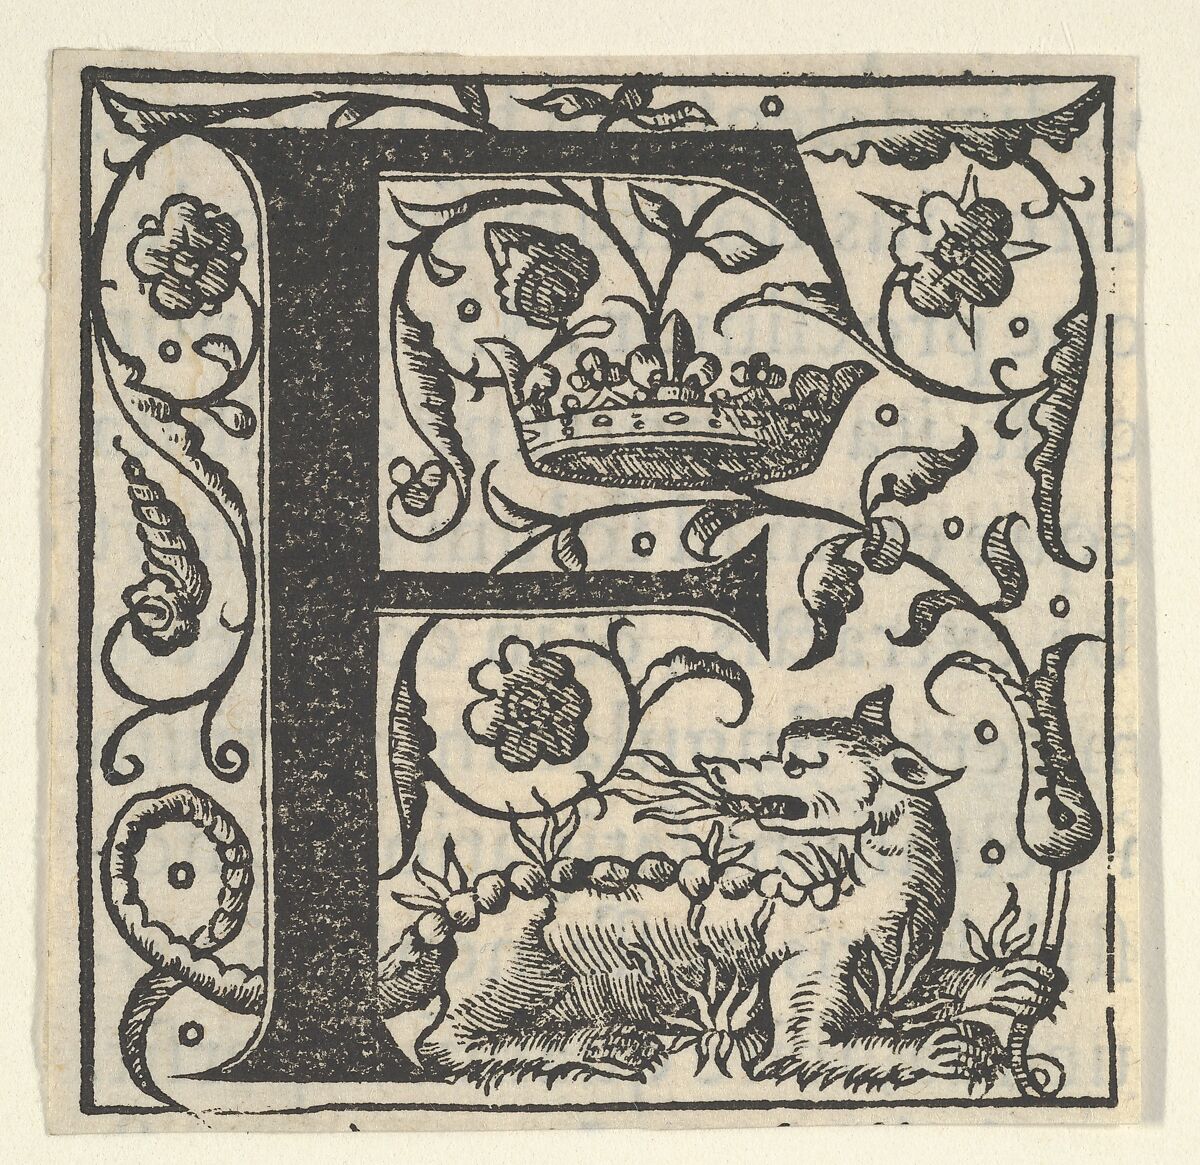 Initial letter F with salamander and crown (related to King Francis I), Woodcut 